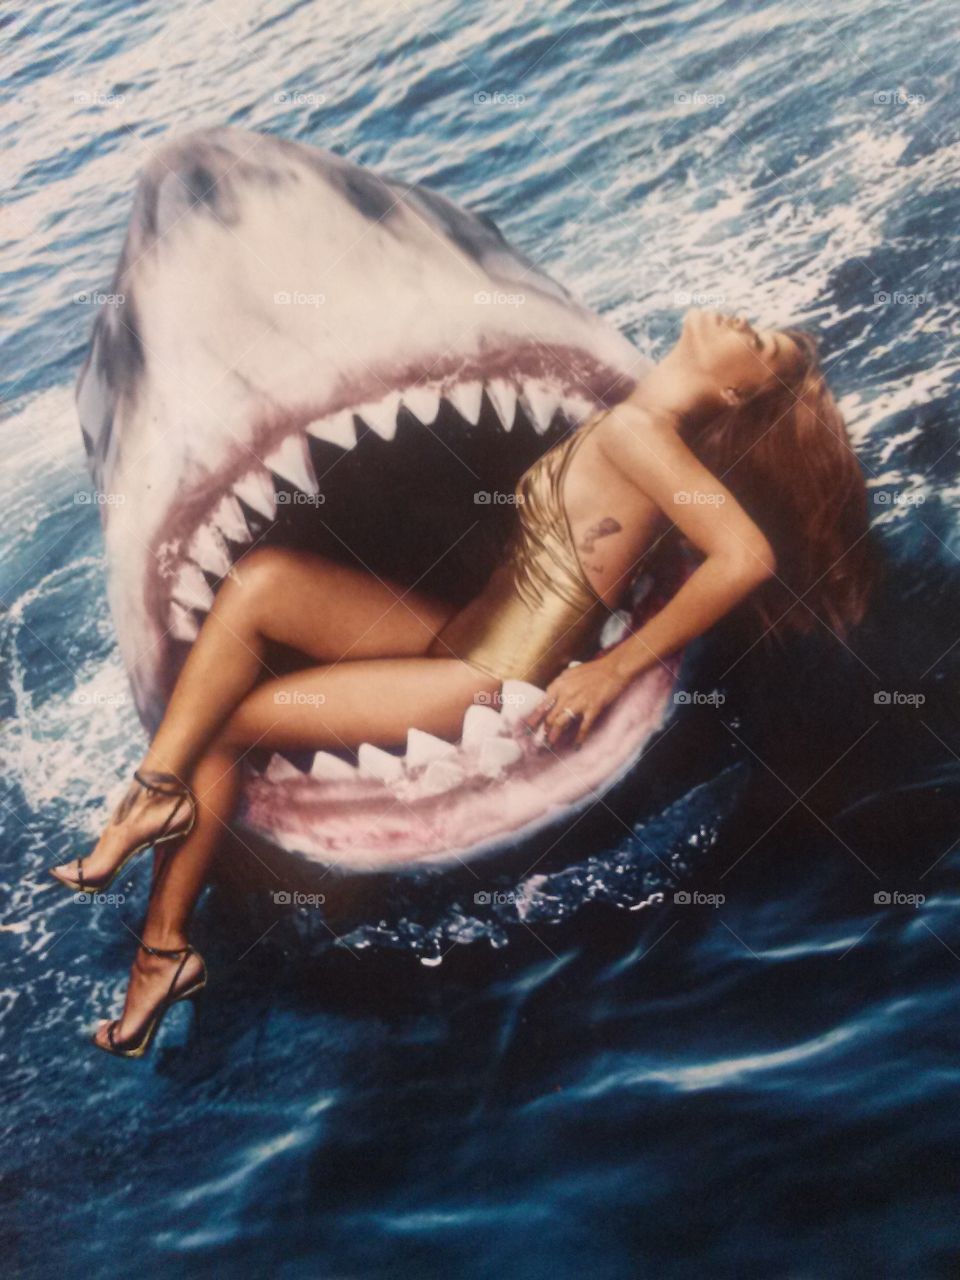 magazine cover. jaws teeth on a woman (magazine cover) 